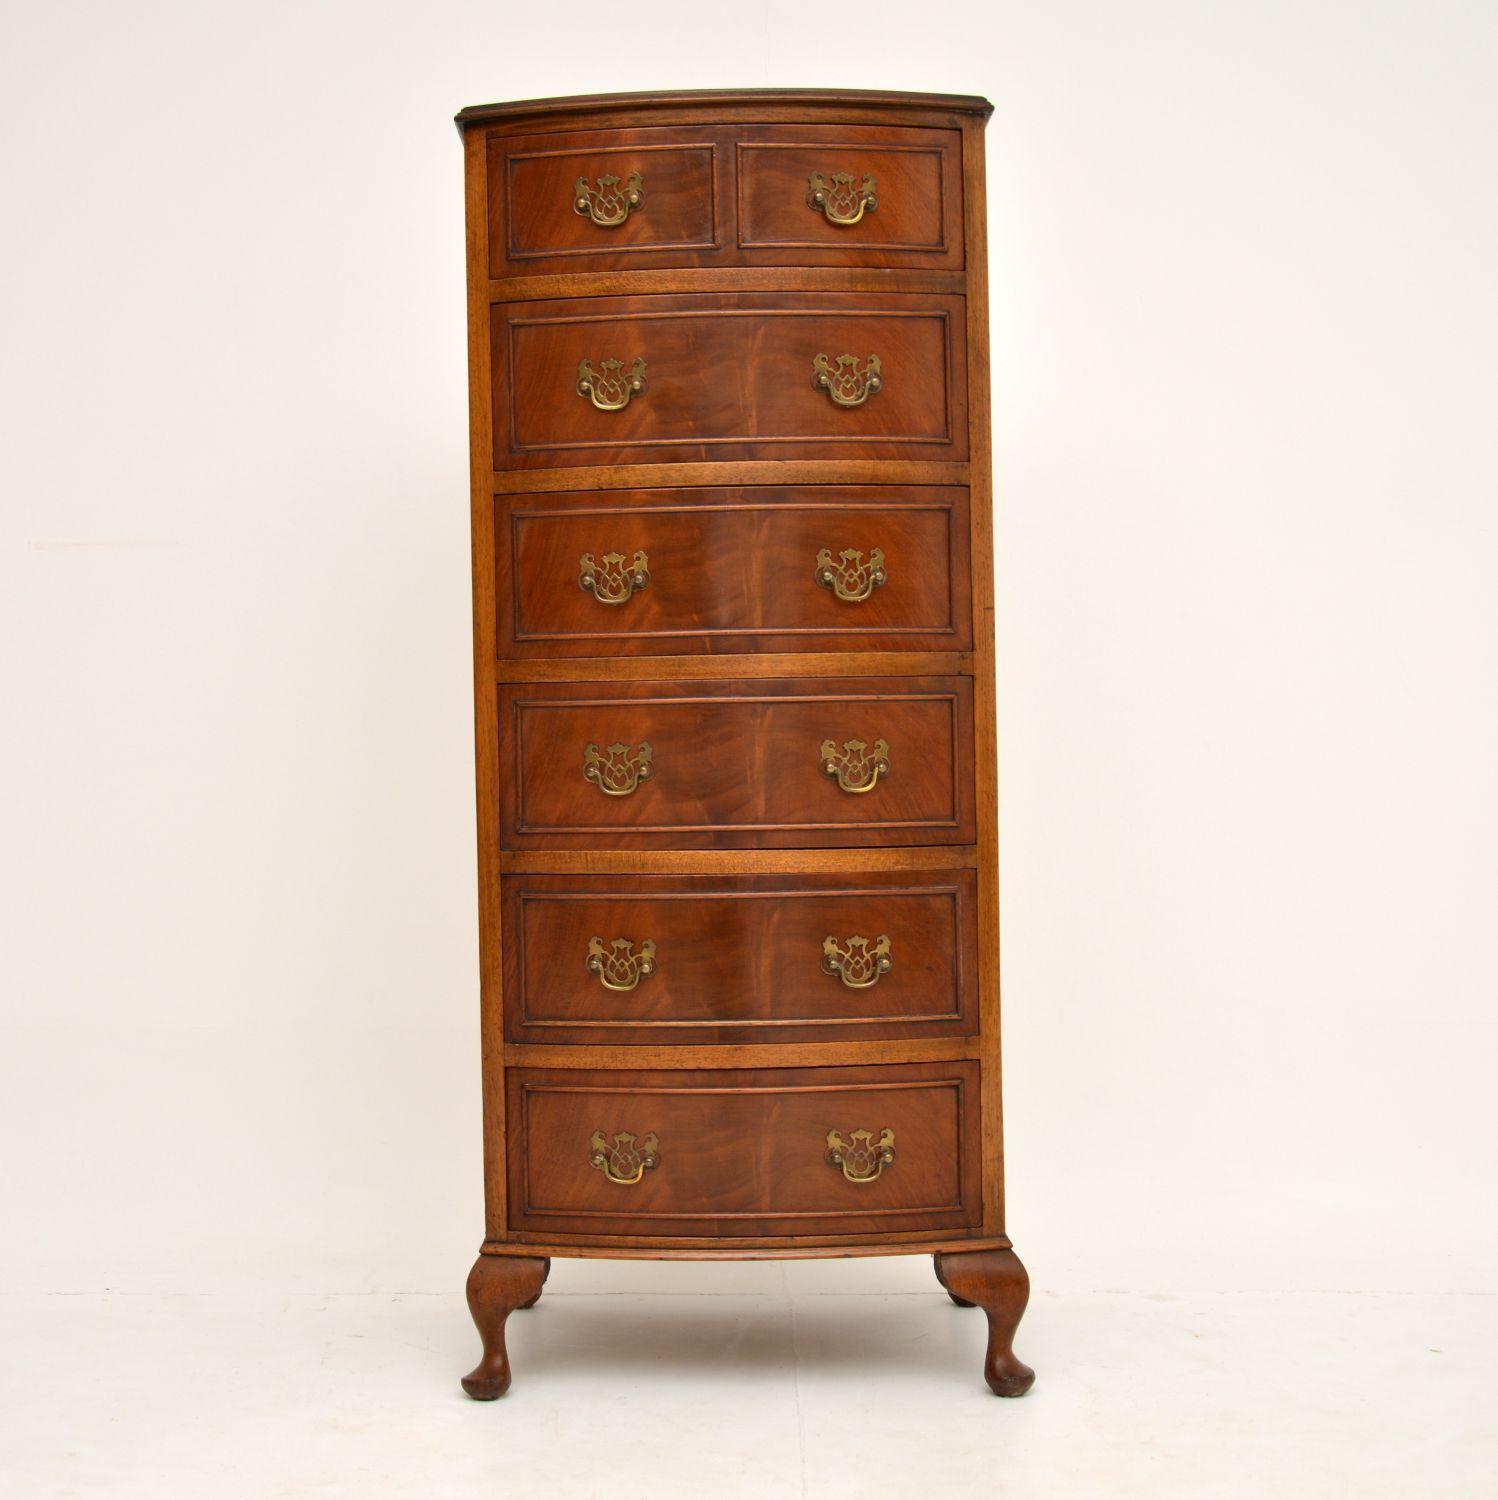 A beautiful slim bow front chest of drawers. This is in the antique Georgian style & I believe it dates from around the 1930’s period.

It is a very useful size, offering lots of storage space while not taking up much floor space. The quality is